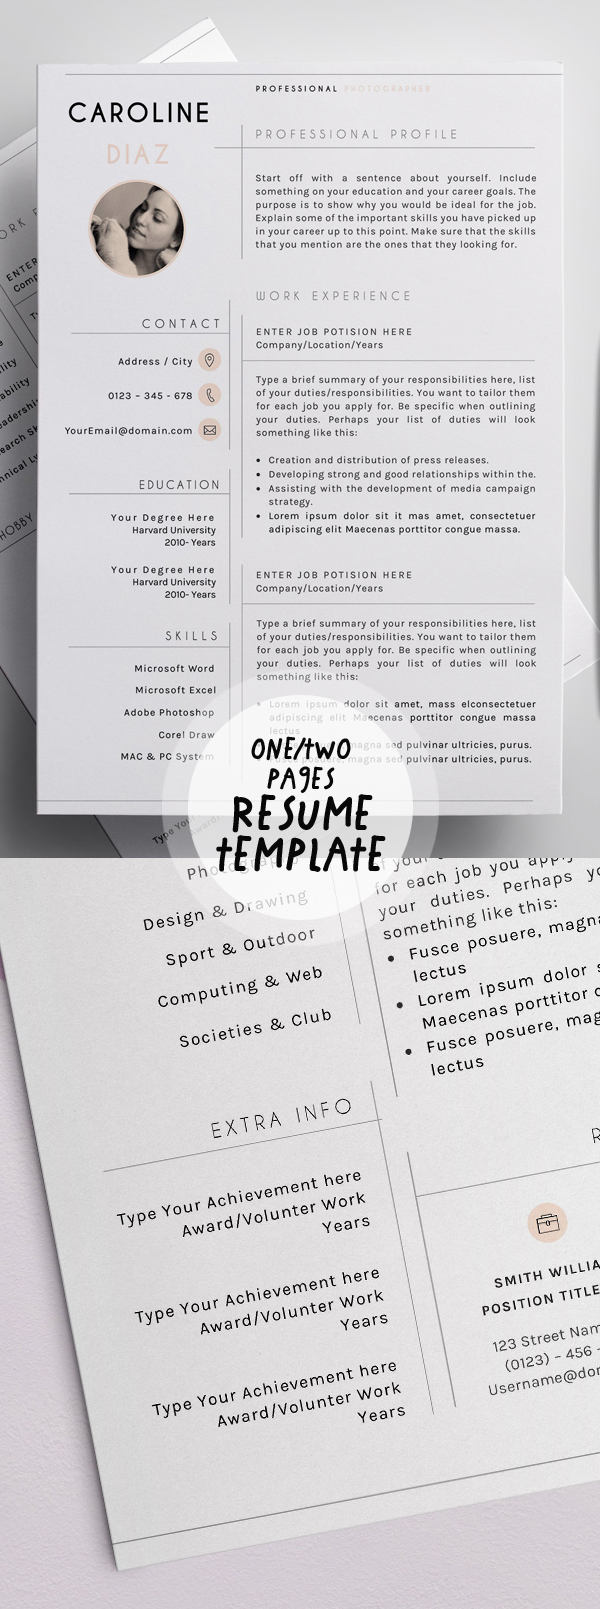 50 Best Resume Templates For 2018 - 43